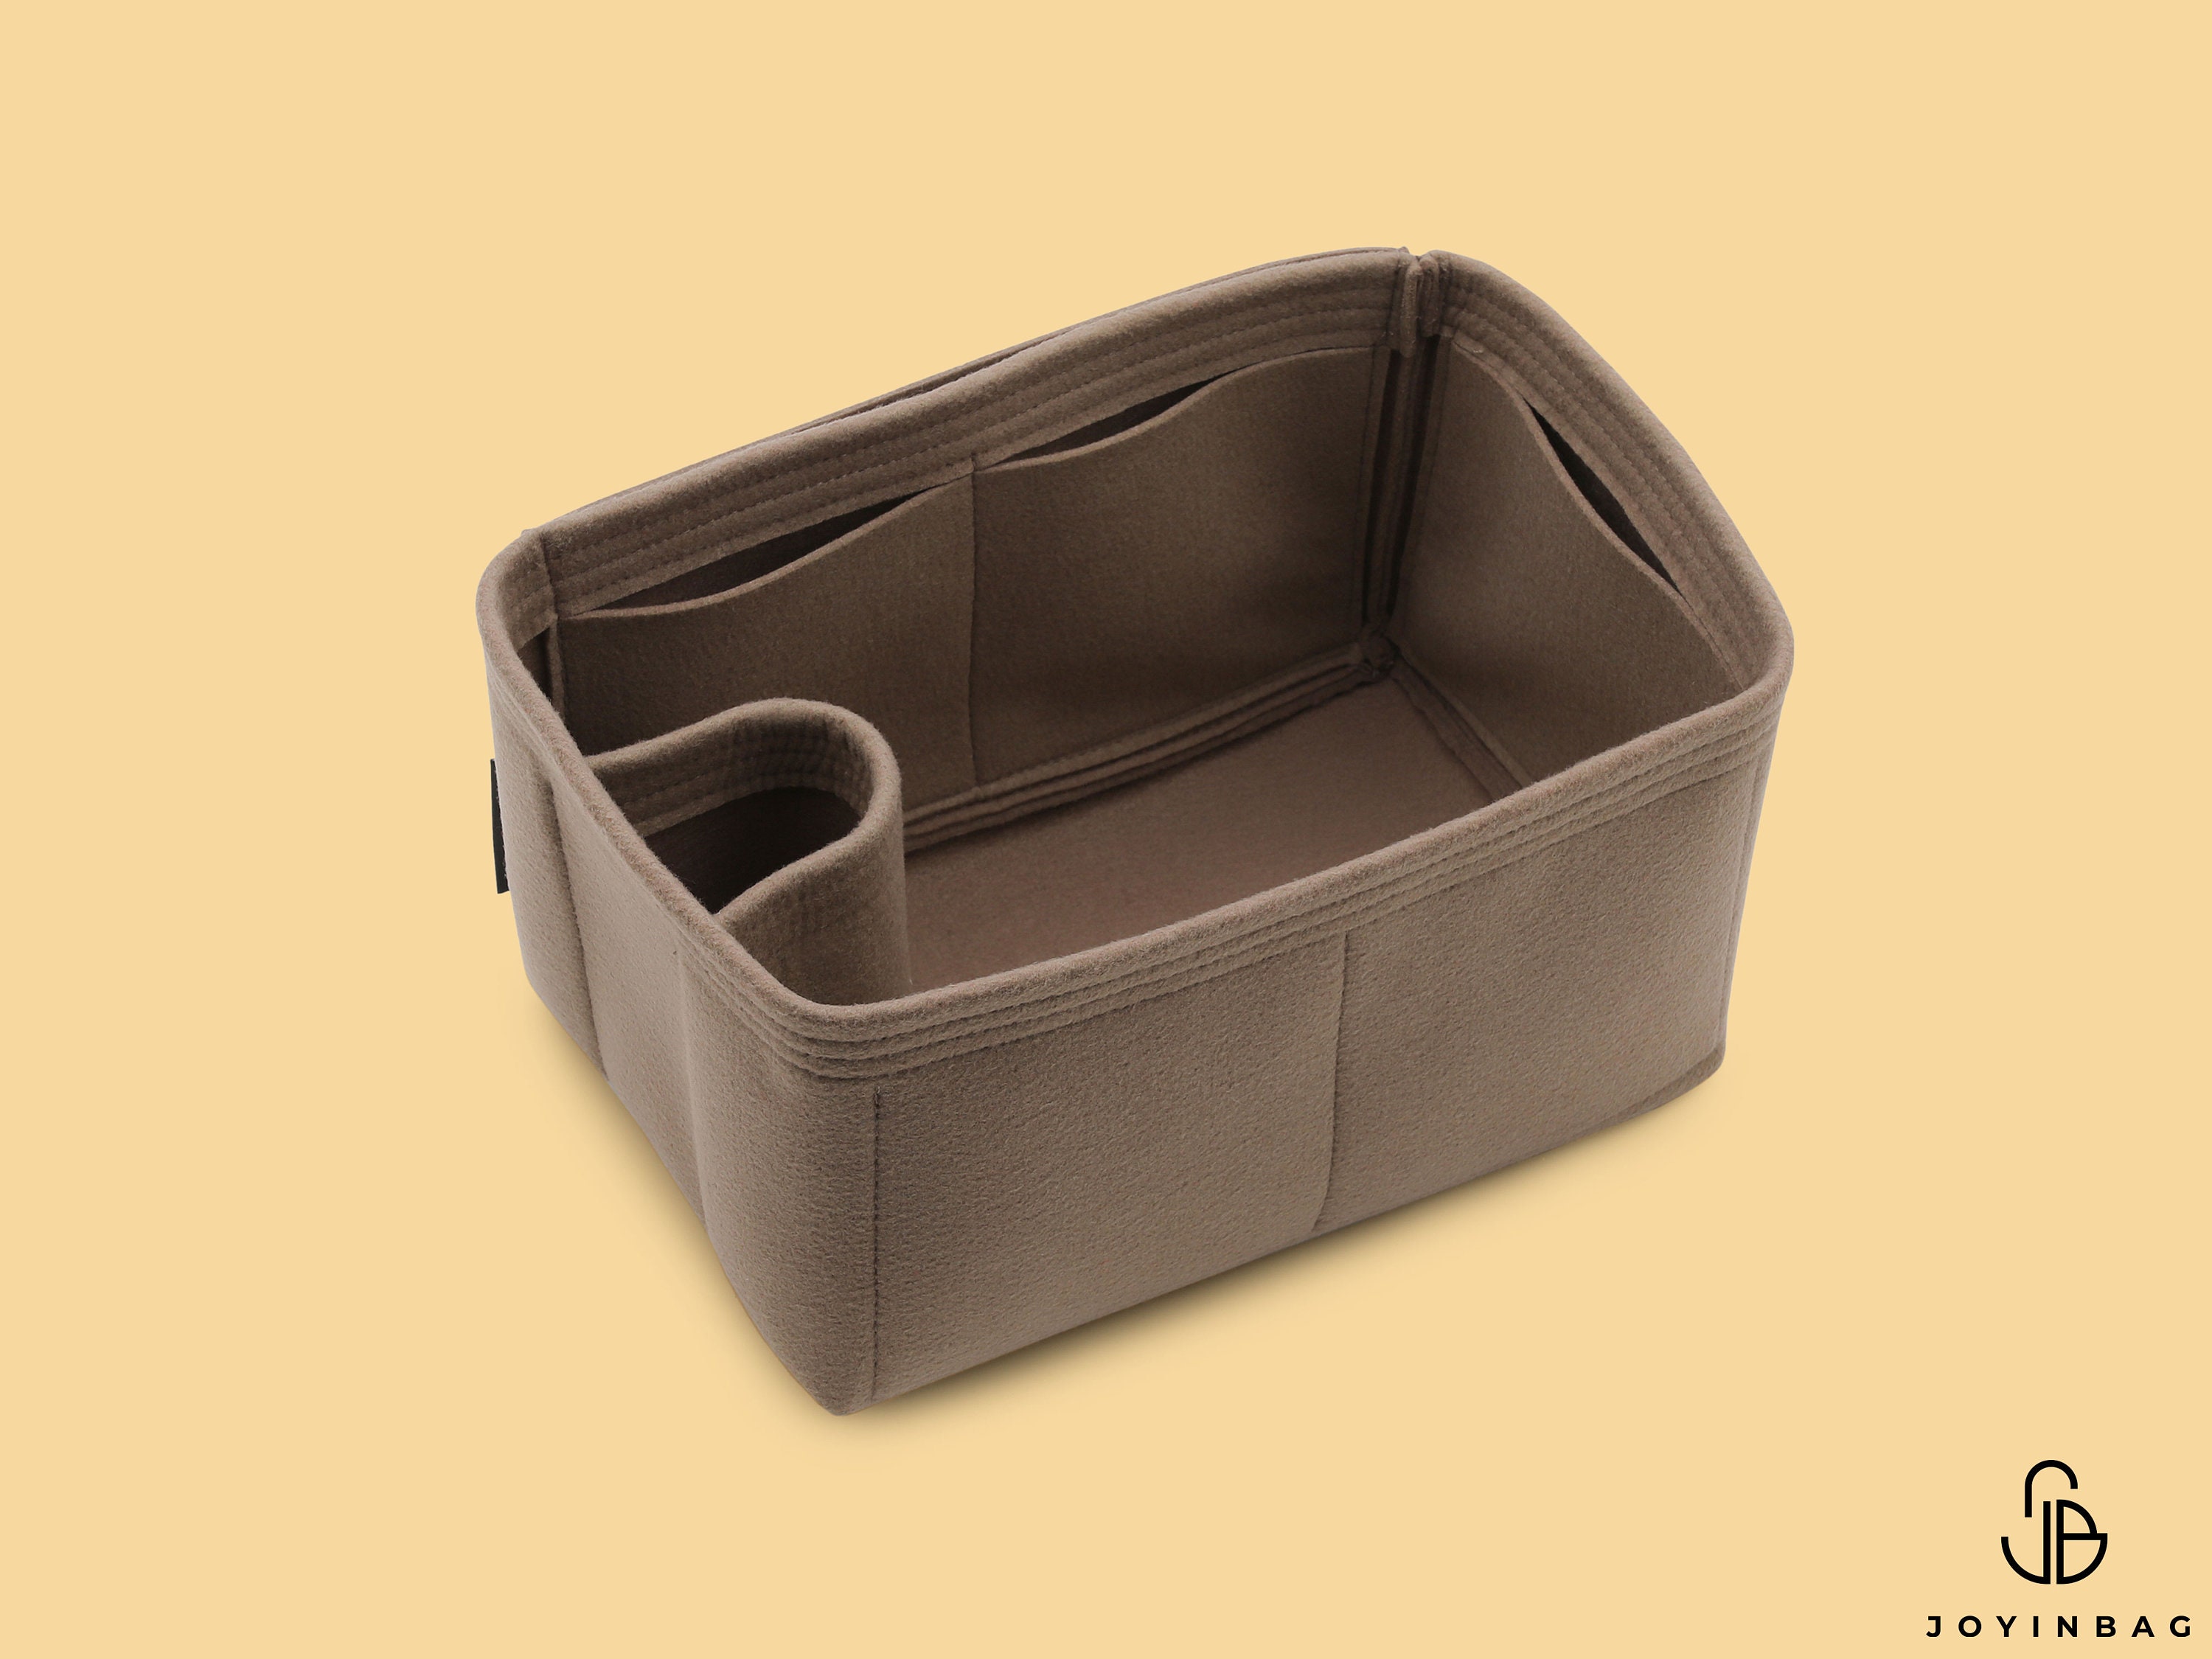 Can you cinch the Neverfull with a Samorga organizer inside? 